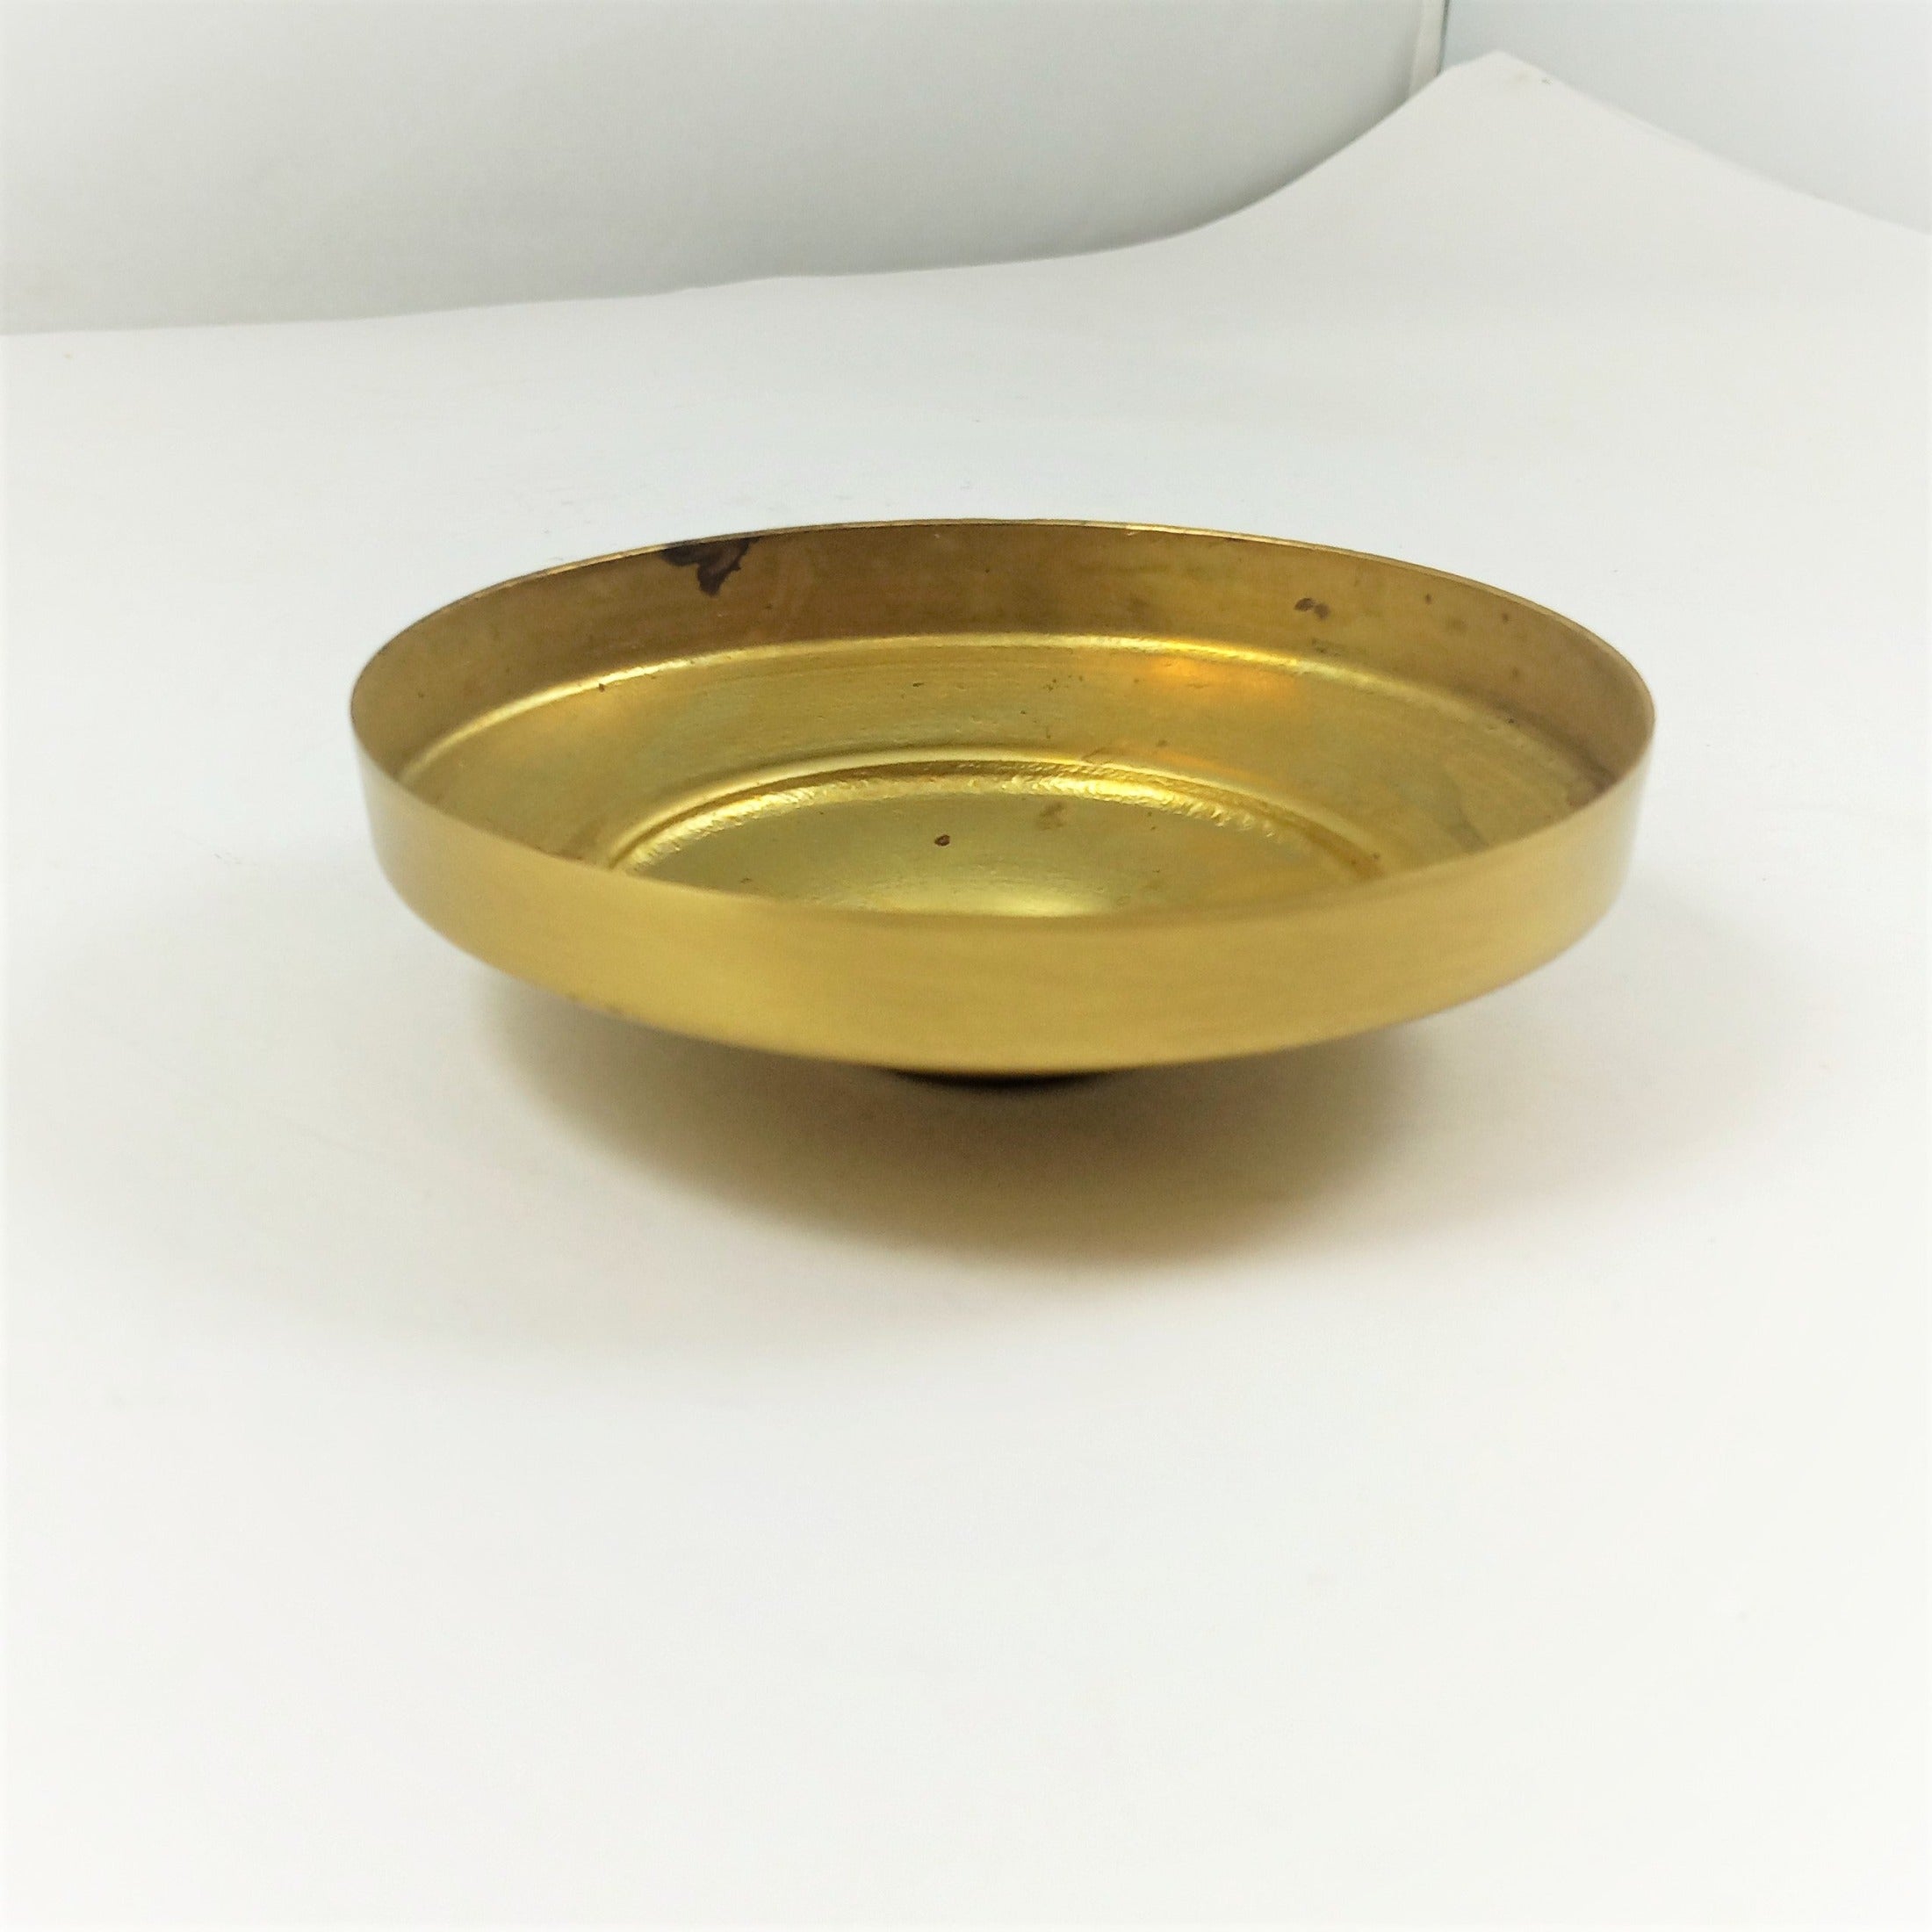 3" Brushed & Lacquered Deep Brass Cap with 1/2" Edge